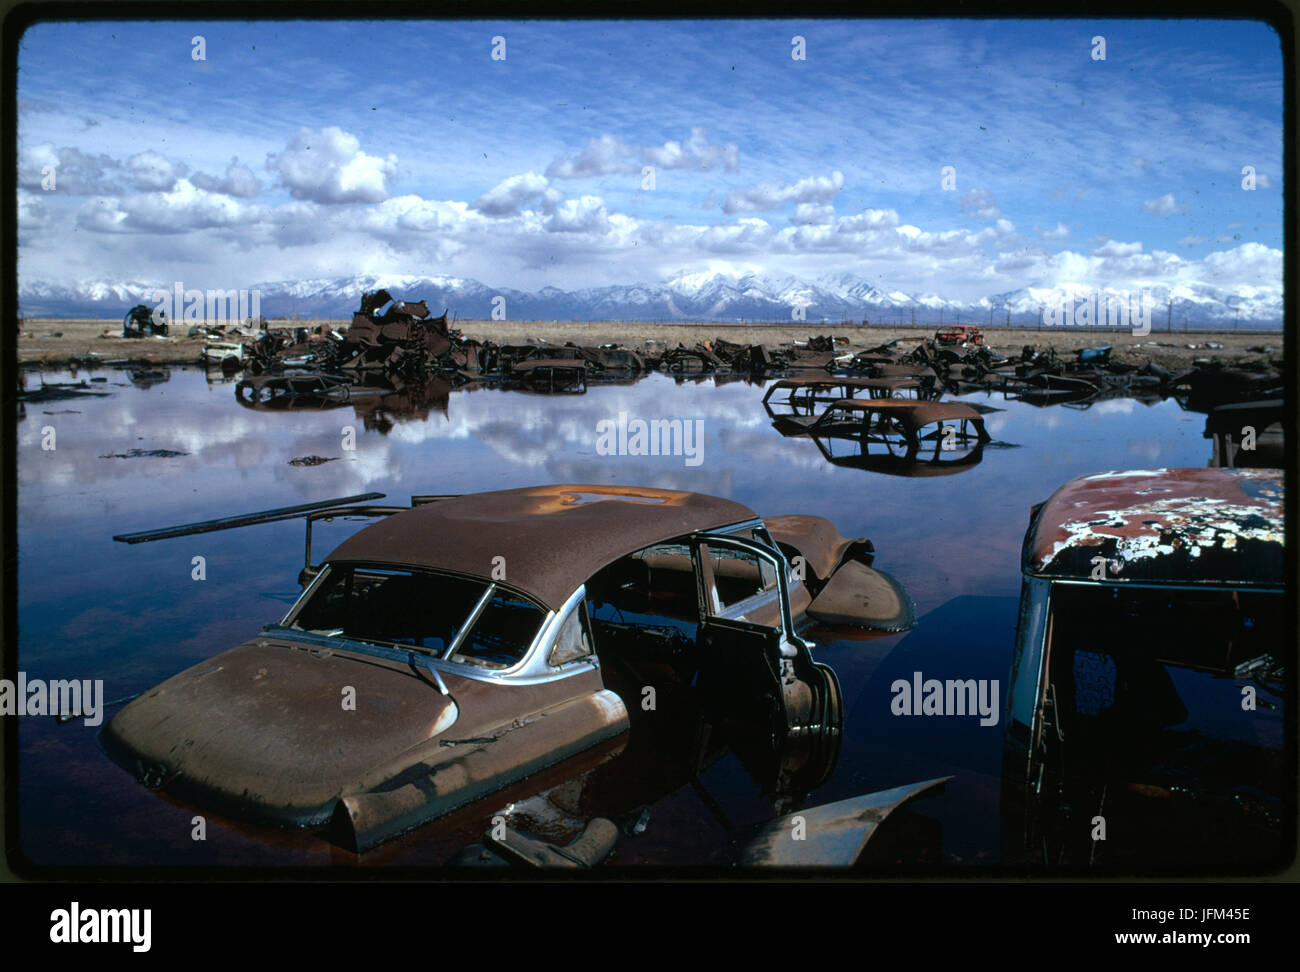 Abandoned automobiles and other debris clutter acid water and oil-filled five-acre pond. It was cleaned up under the Environmental Protection Agency supervision to prevent possible contamination of Great Salt Lake and a wildlife refuge nearby. Utah, April 1974. Stock Photo